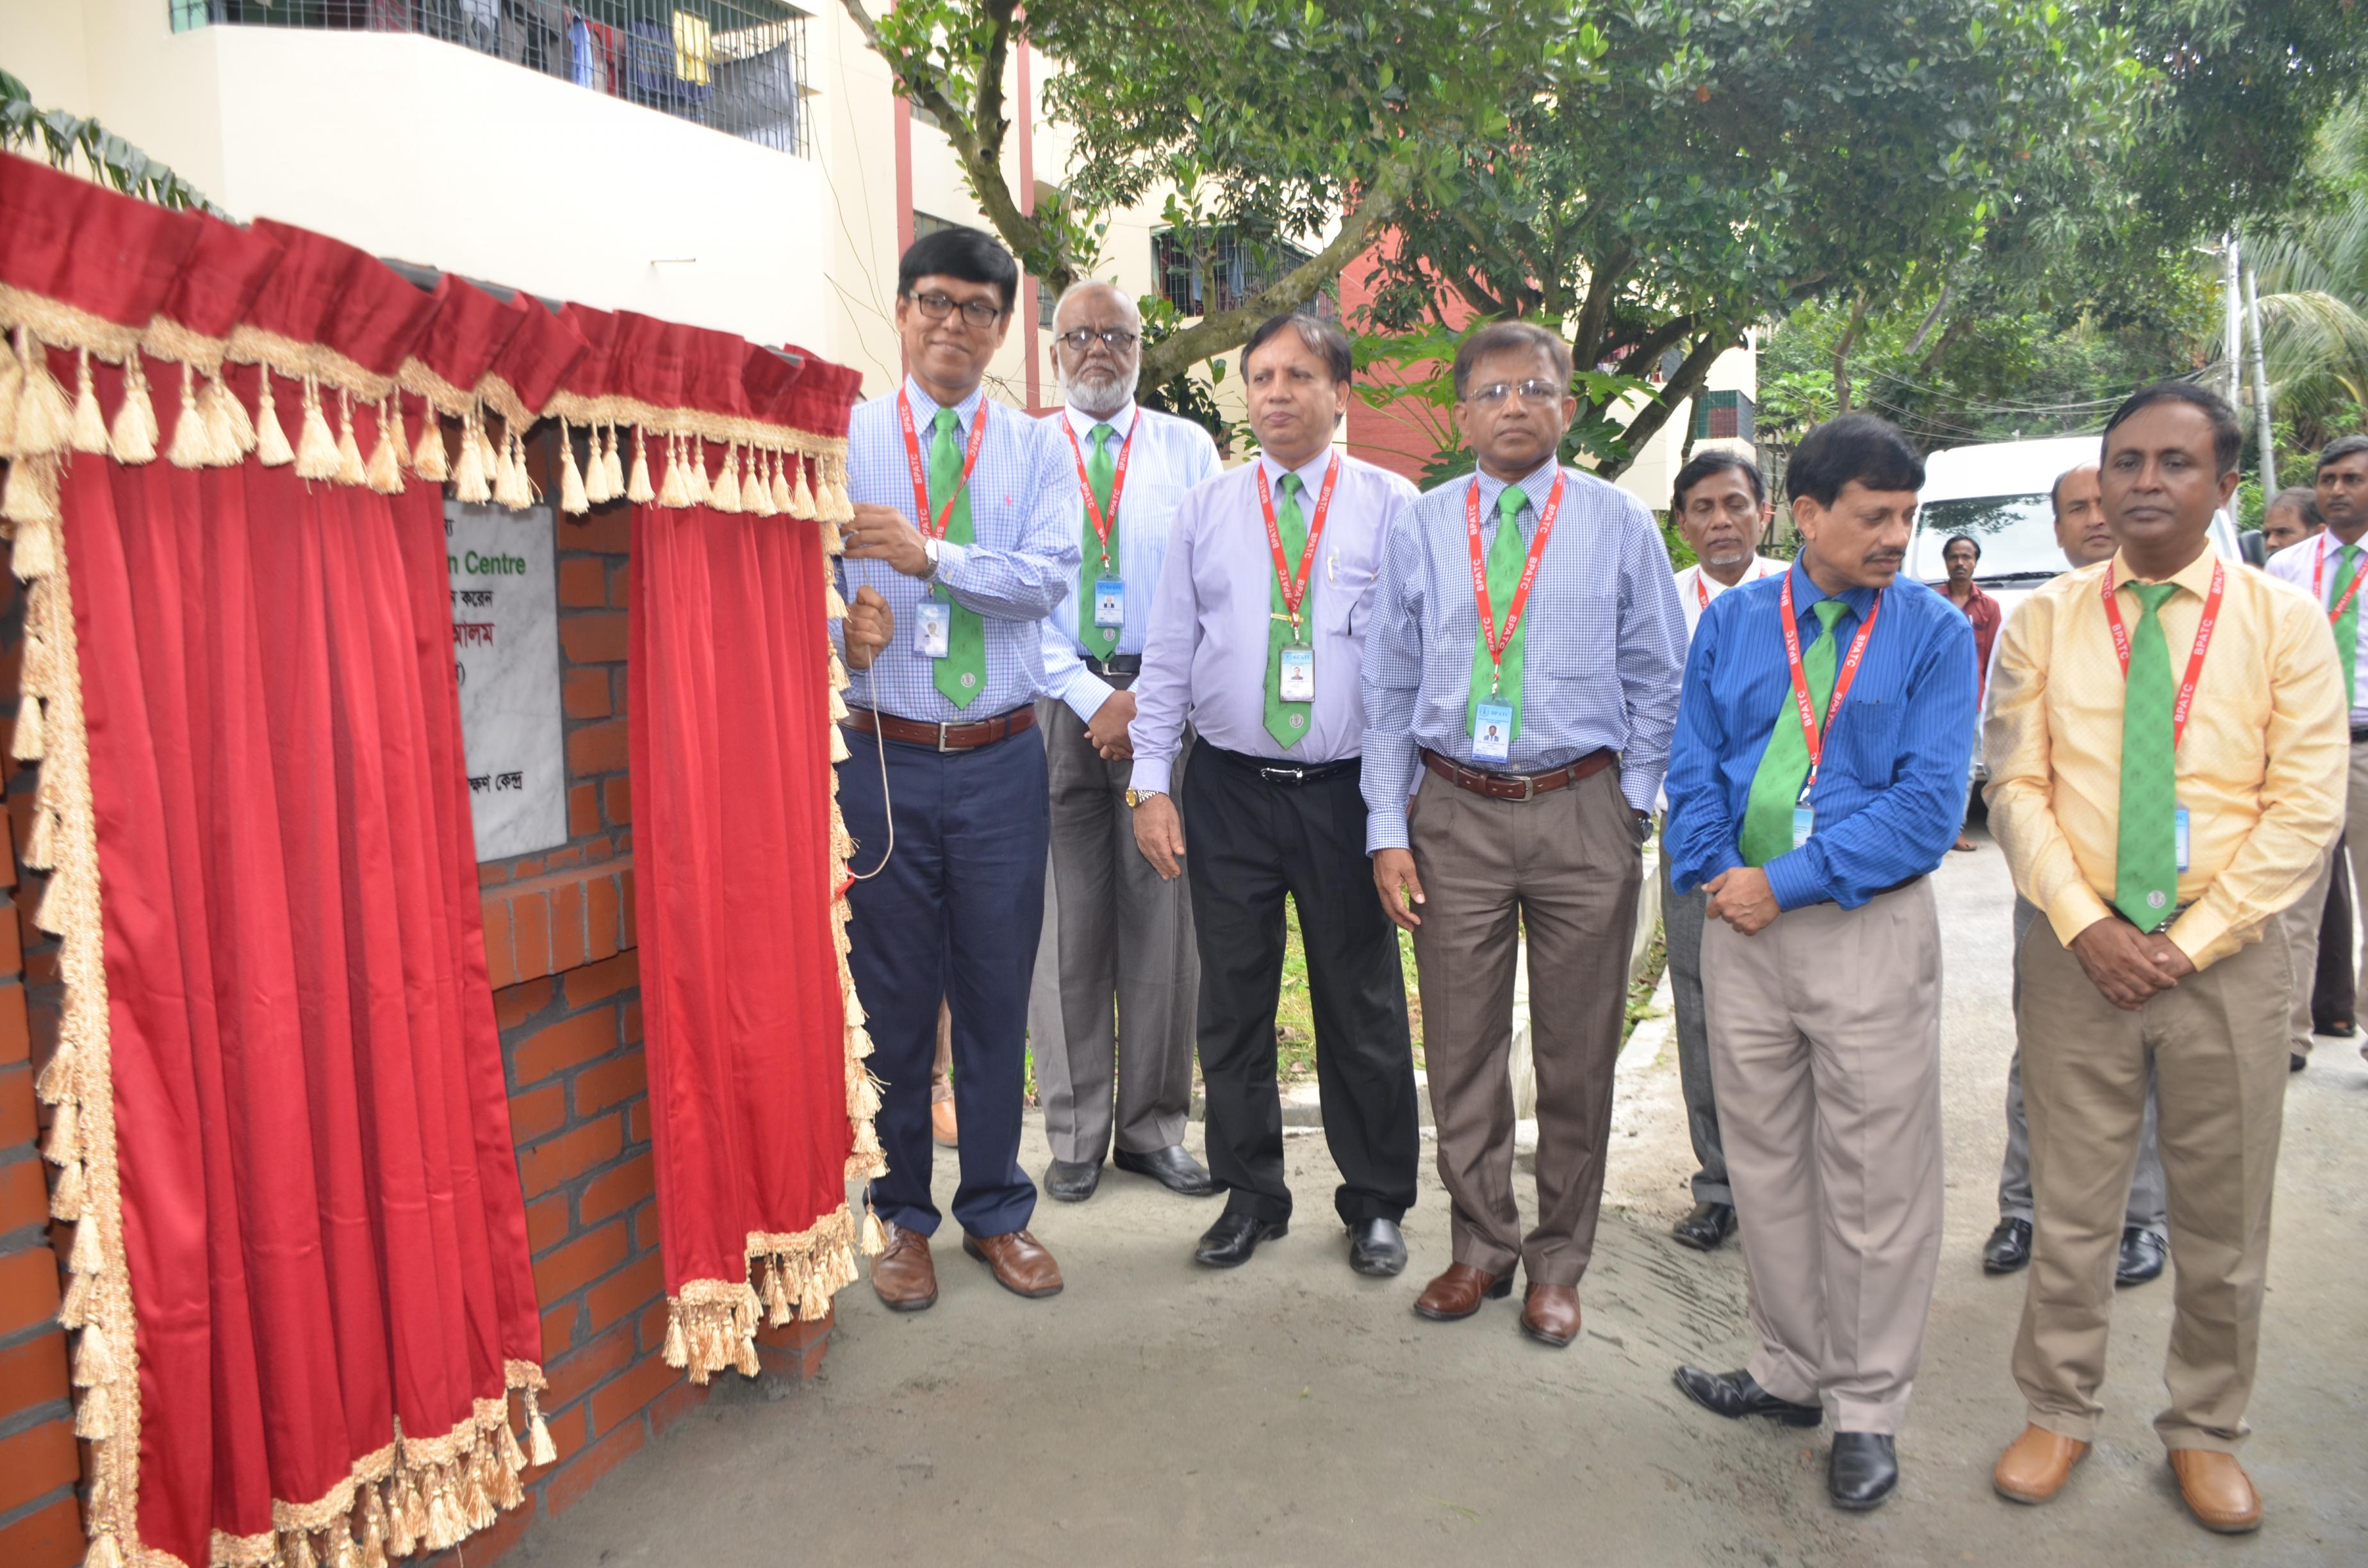 Inauguration of Development works in 2019